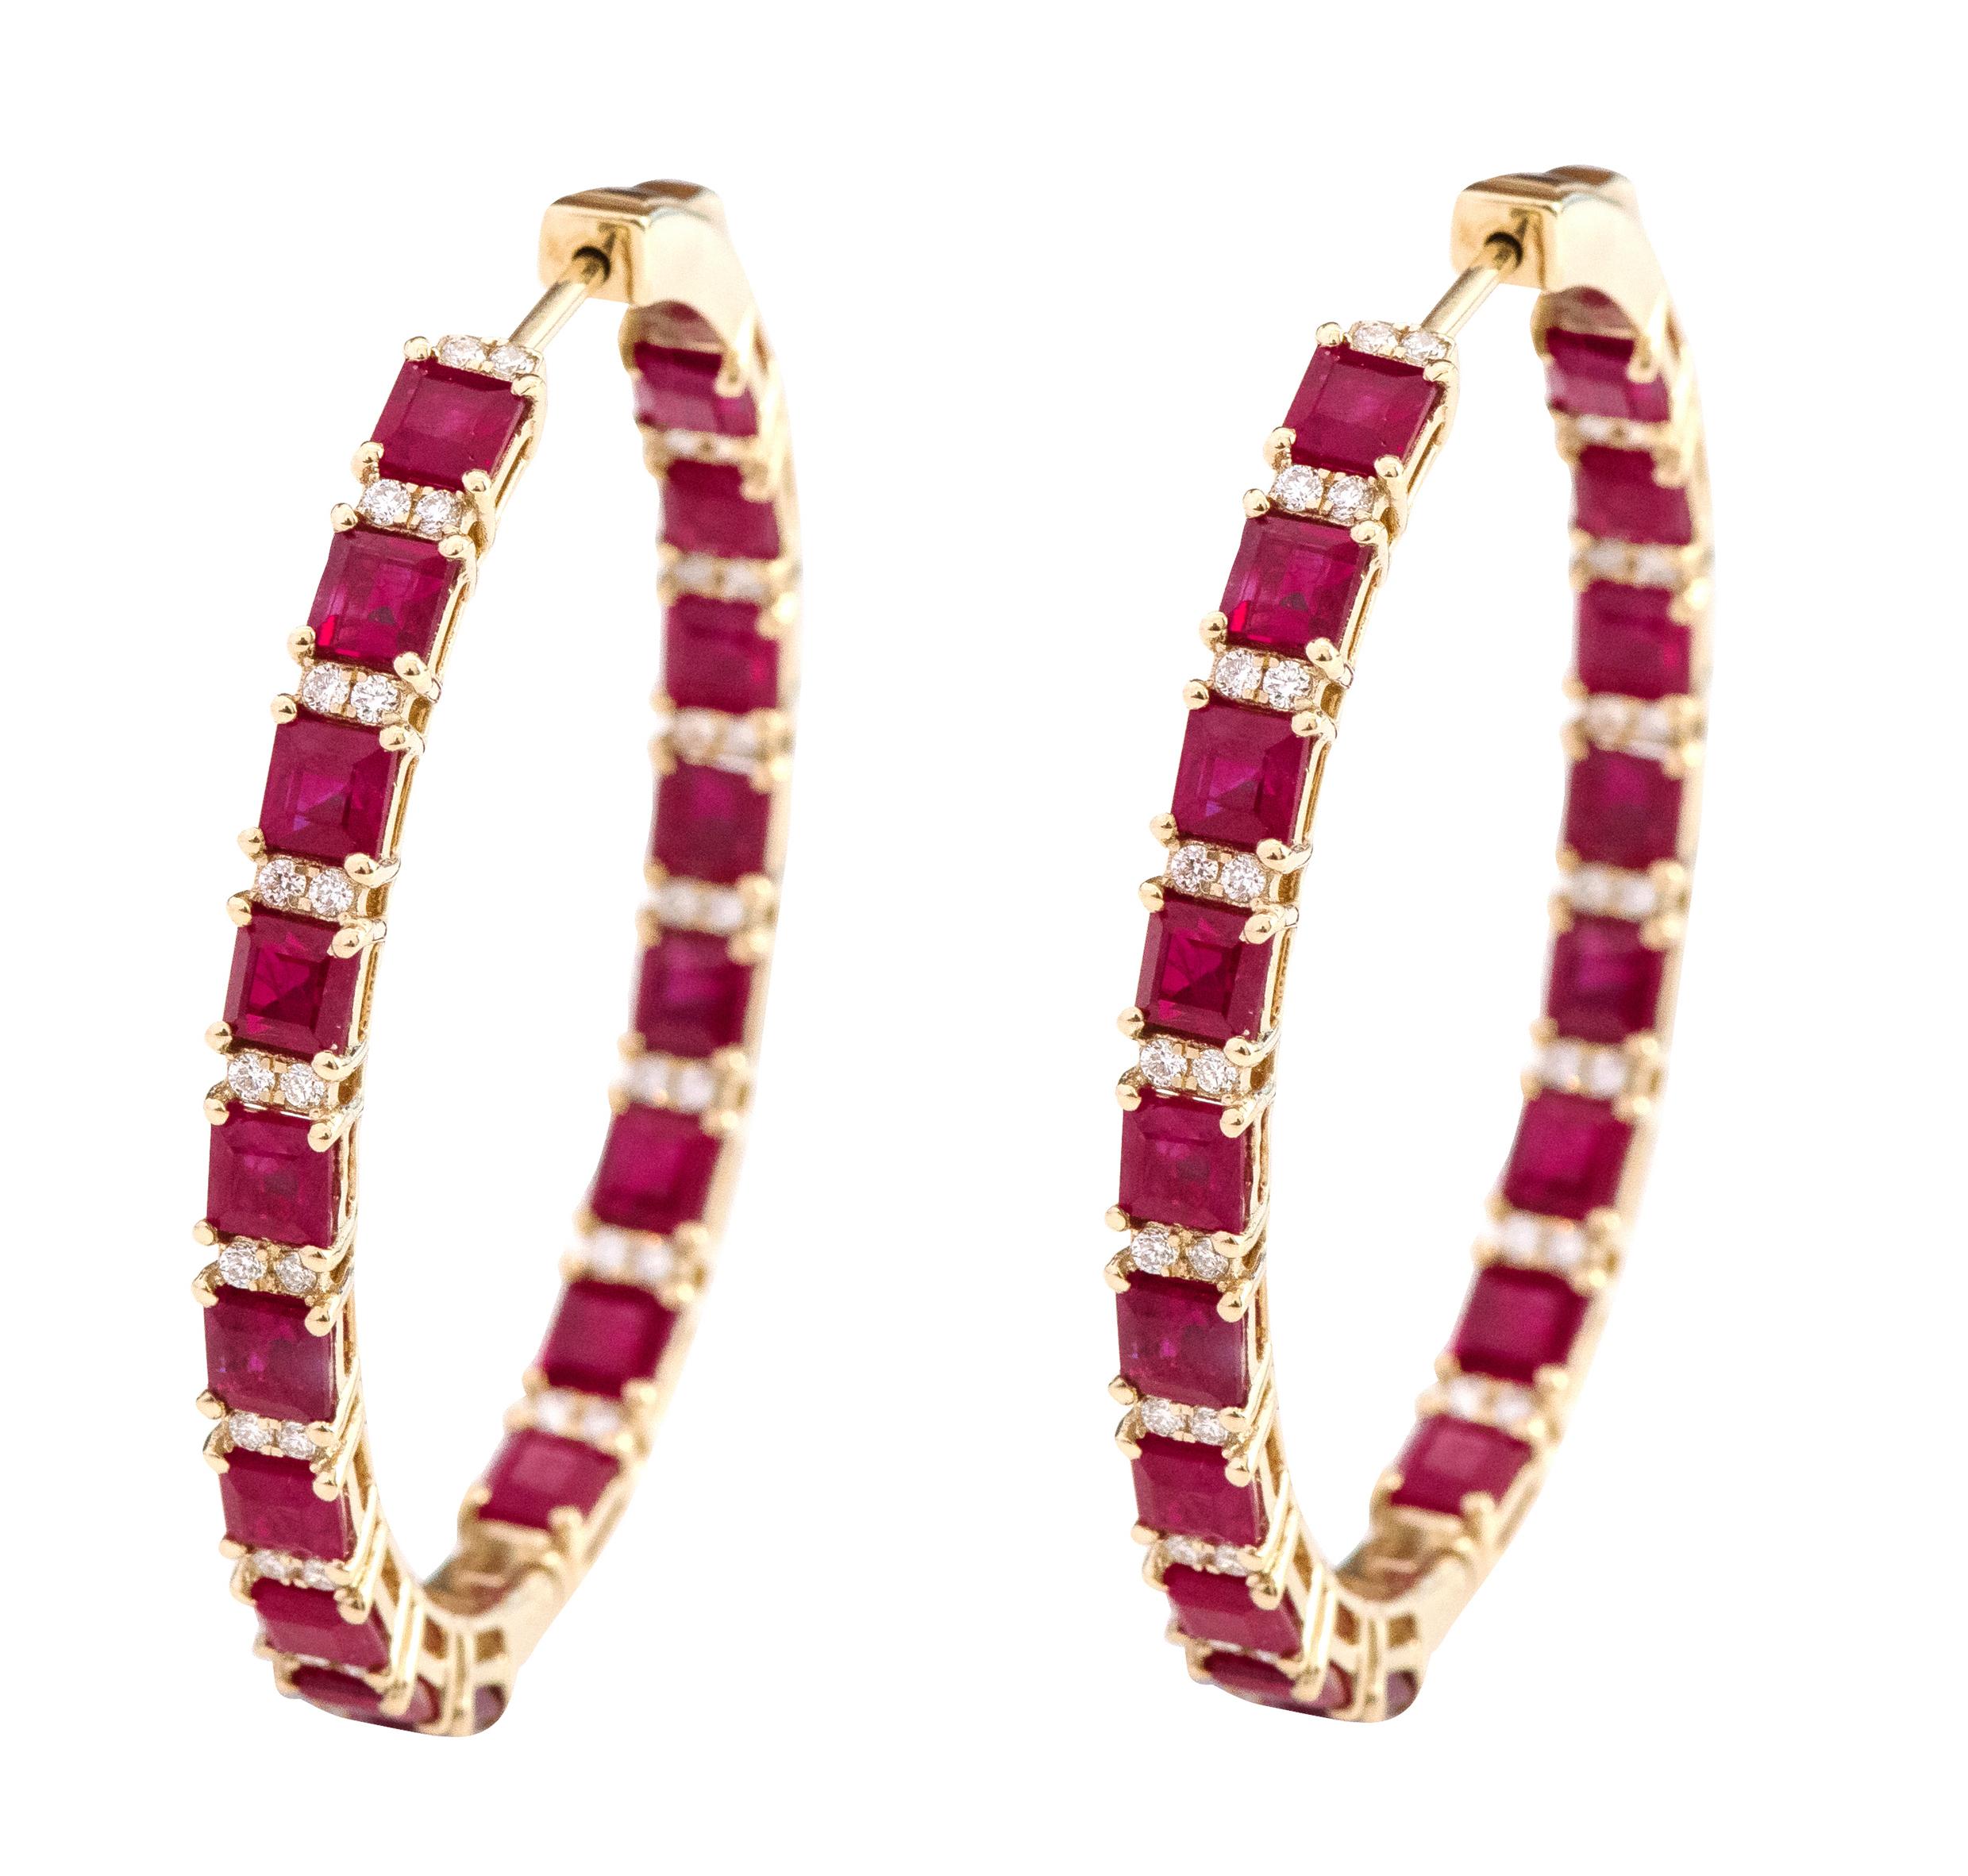 18 Karat Yellow Gold 10.42 Carats Ruby and Diamond Hoop Earrings

This enchanting crimson red ruby and diamond full hoop earring is impressive. The hoop is created with alternating perfect matching princess cut rubies and leveled down round